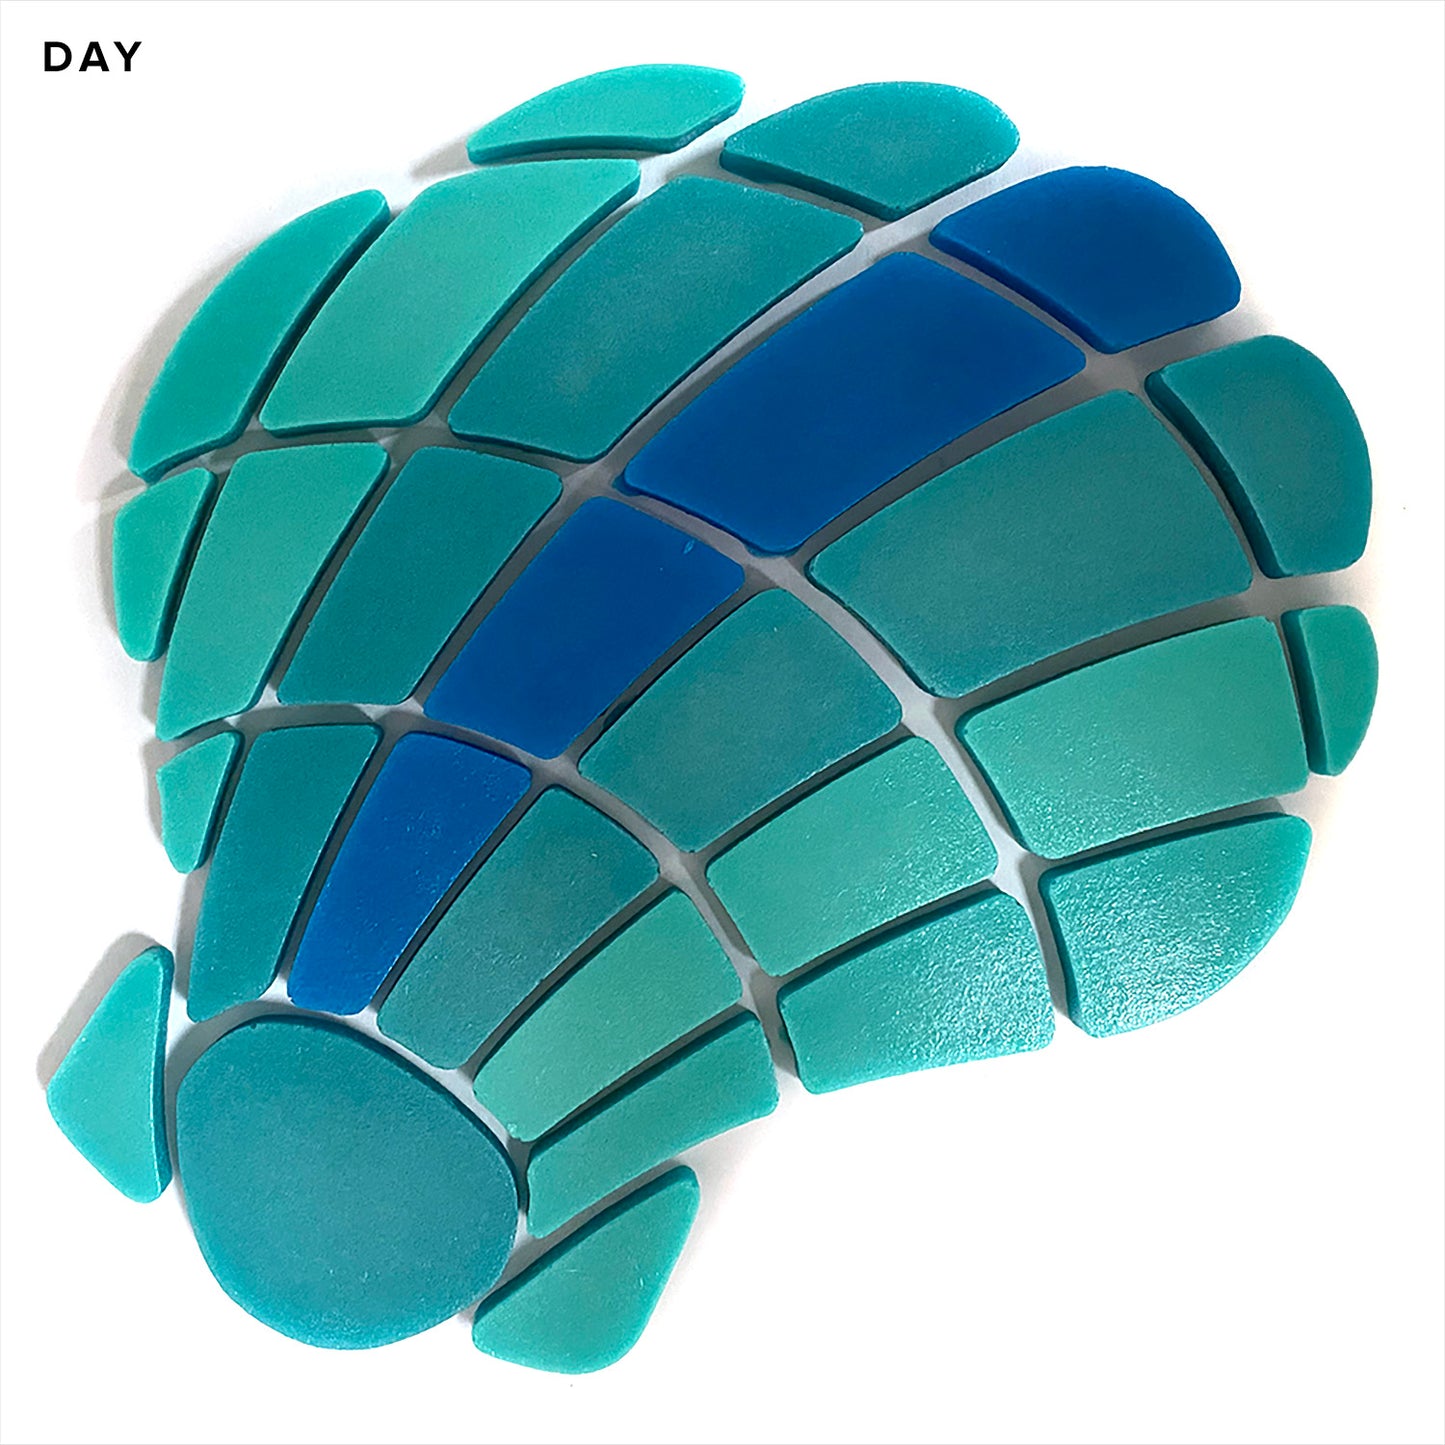 Curved Scallop Shell Glow in the Dark Mosaic